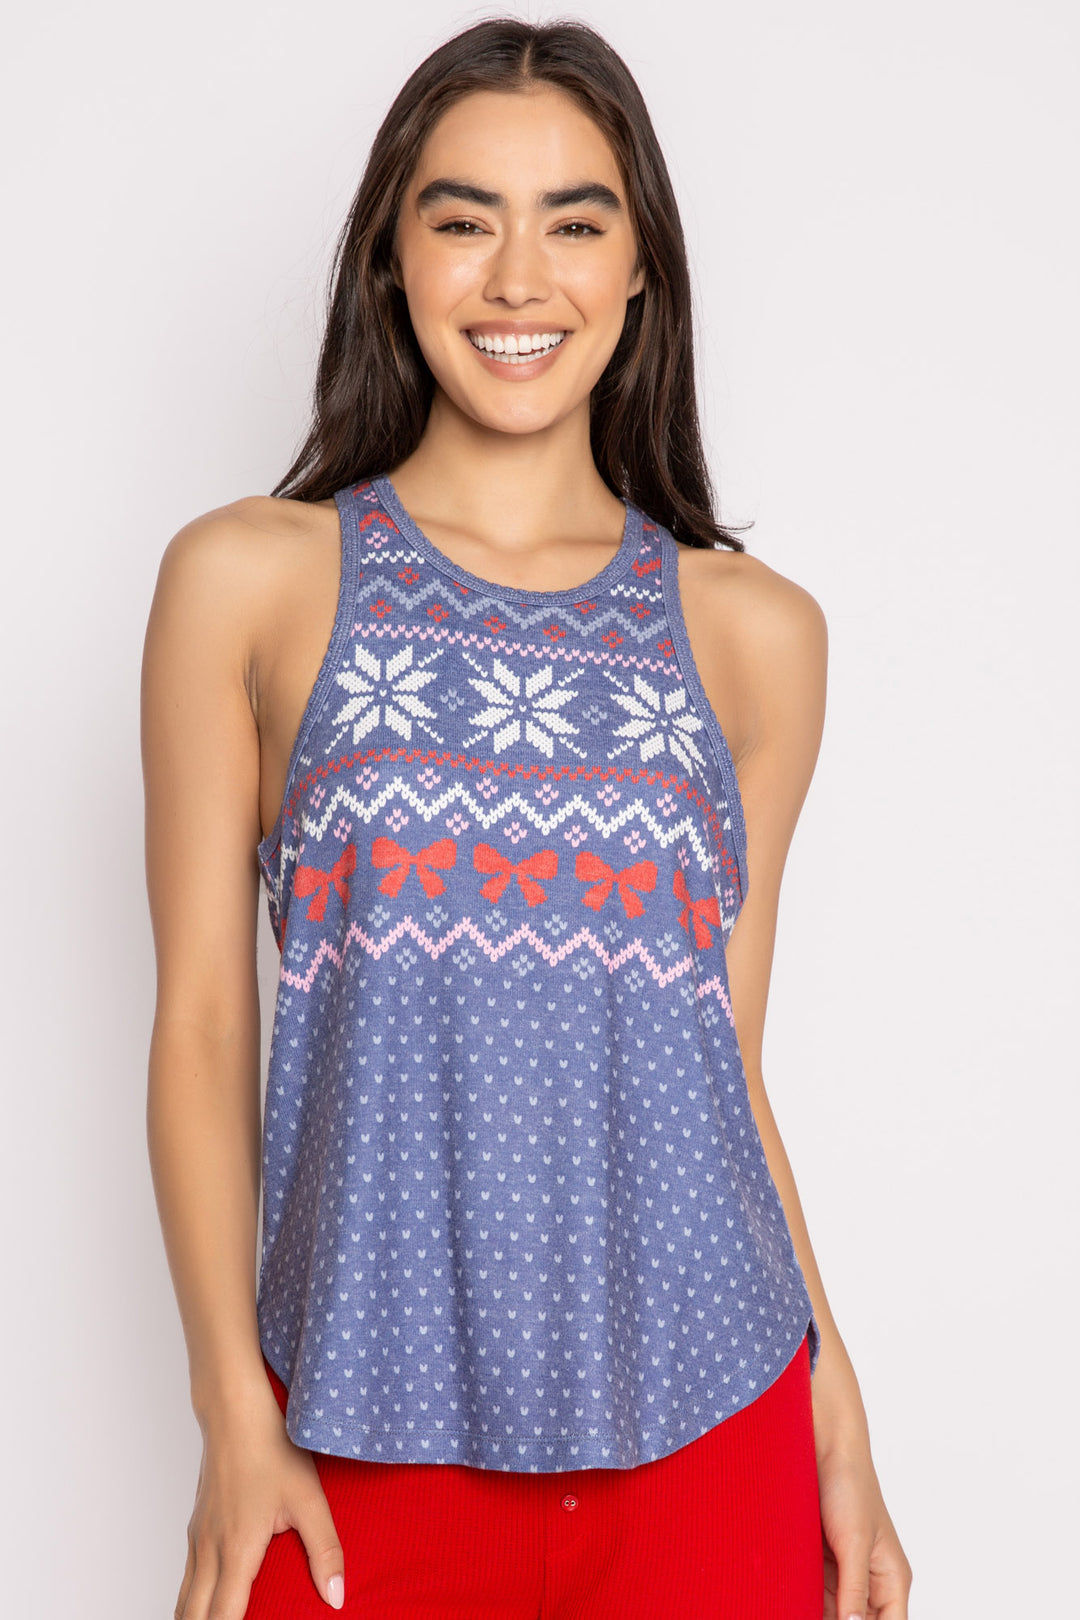 Sleep tank top in blue festive fair isle pattern in ivory-red-pink. Racer back with rounded hem. (7257677725796)